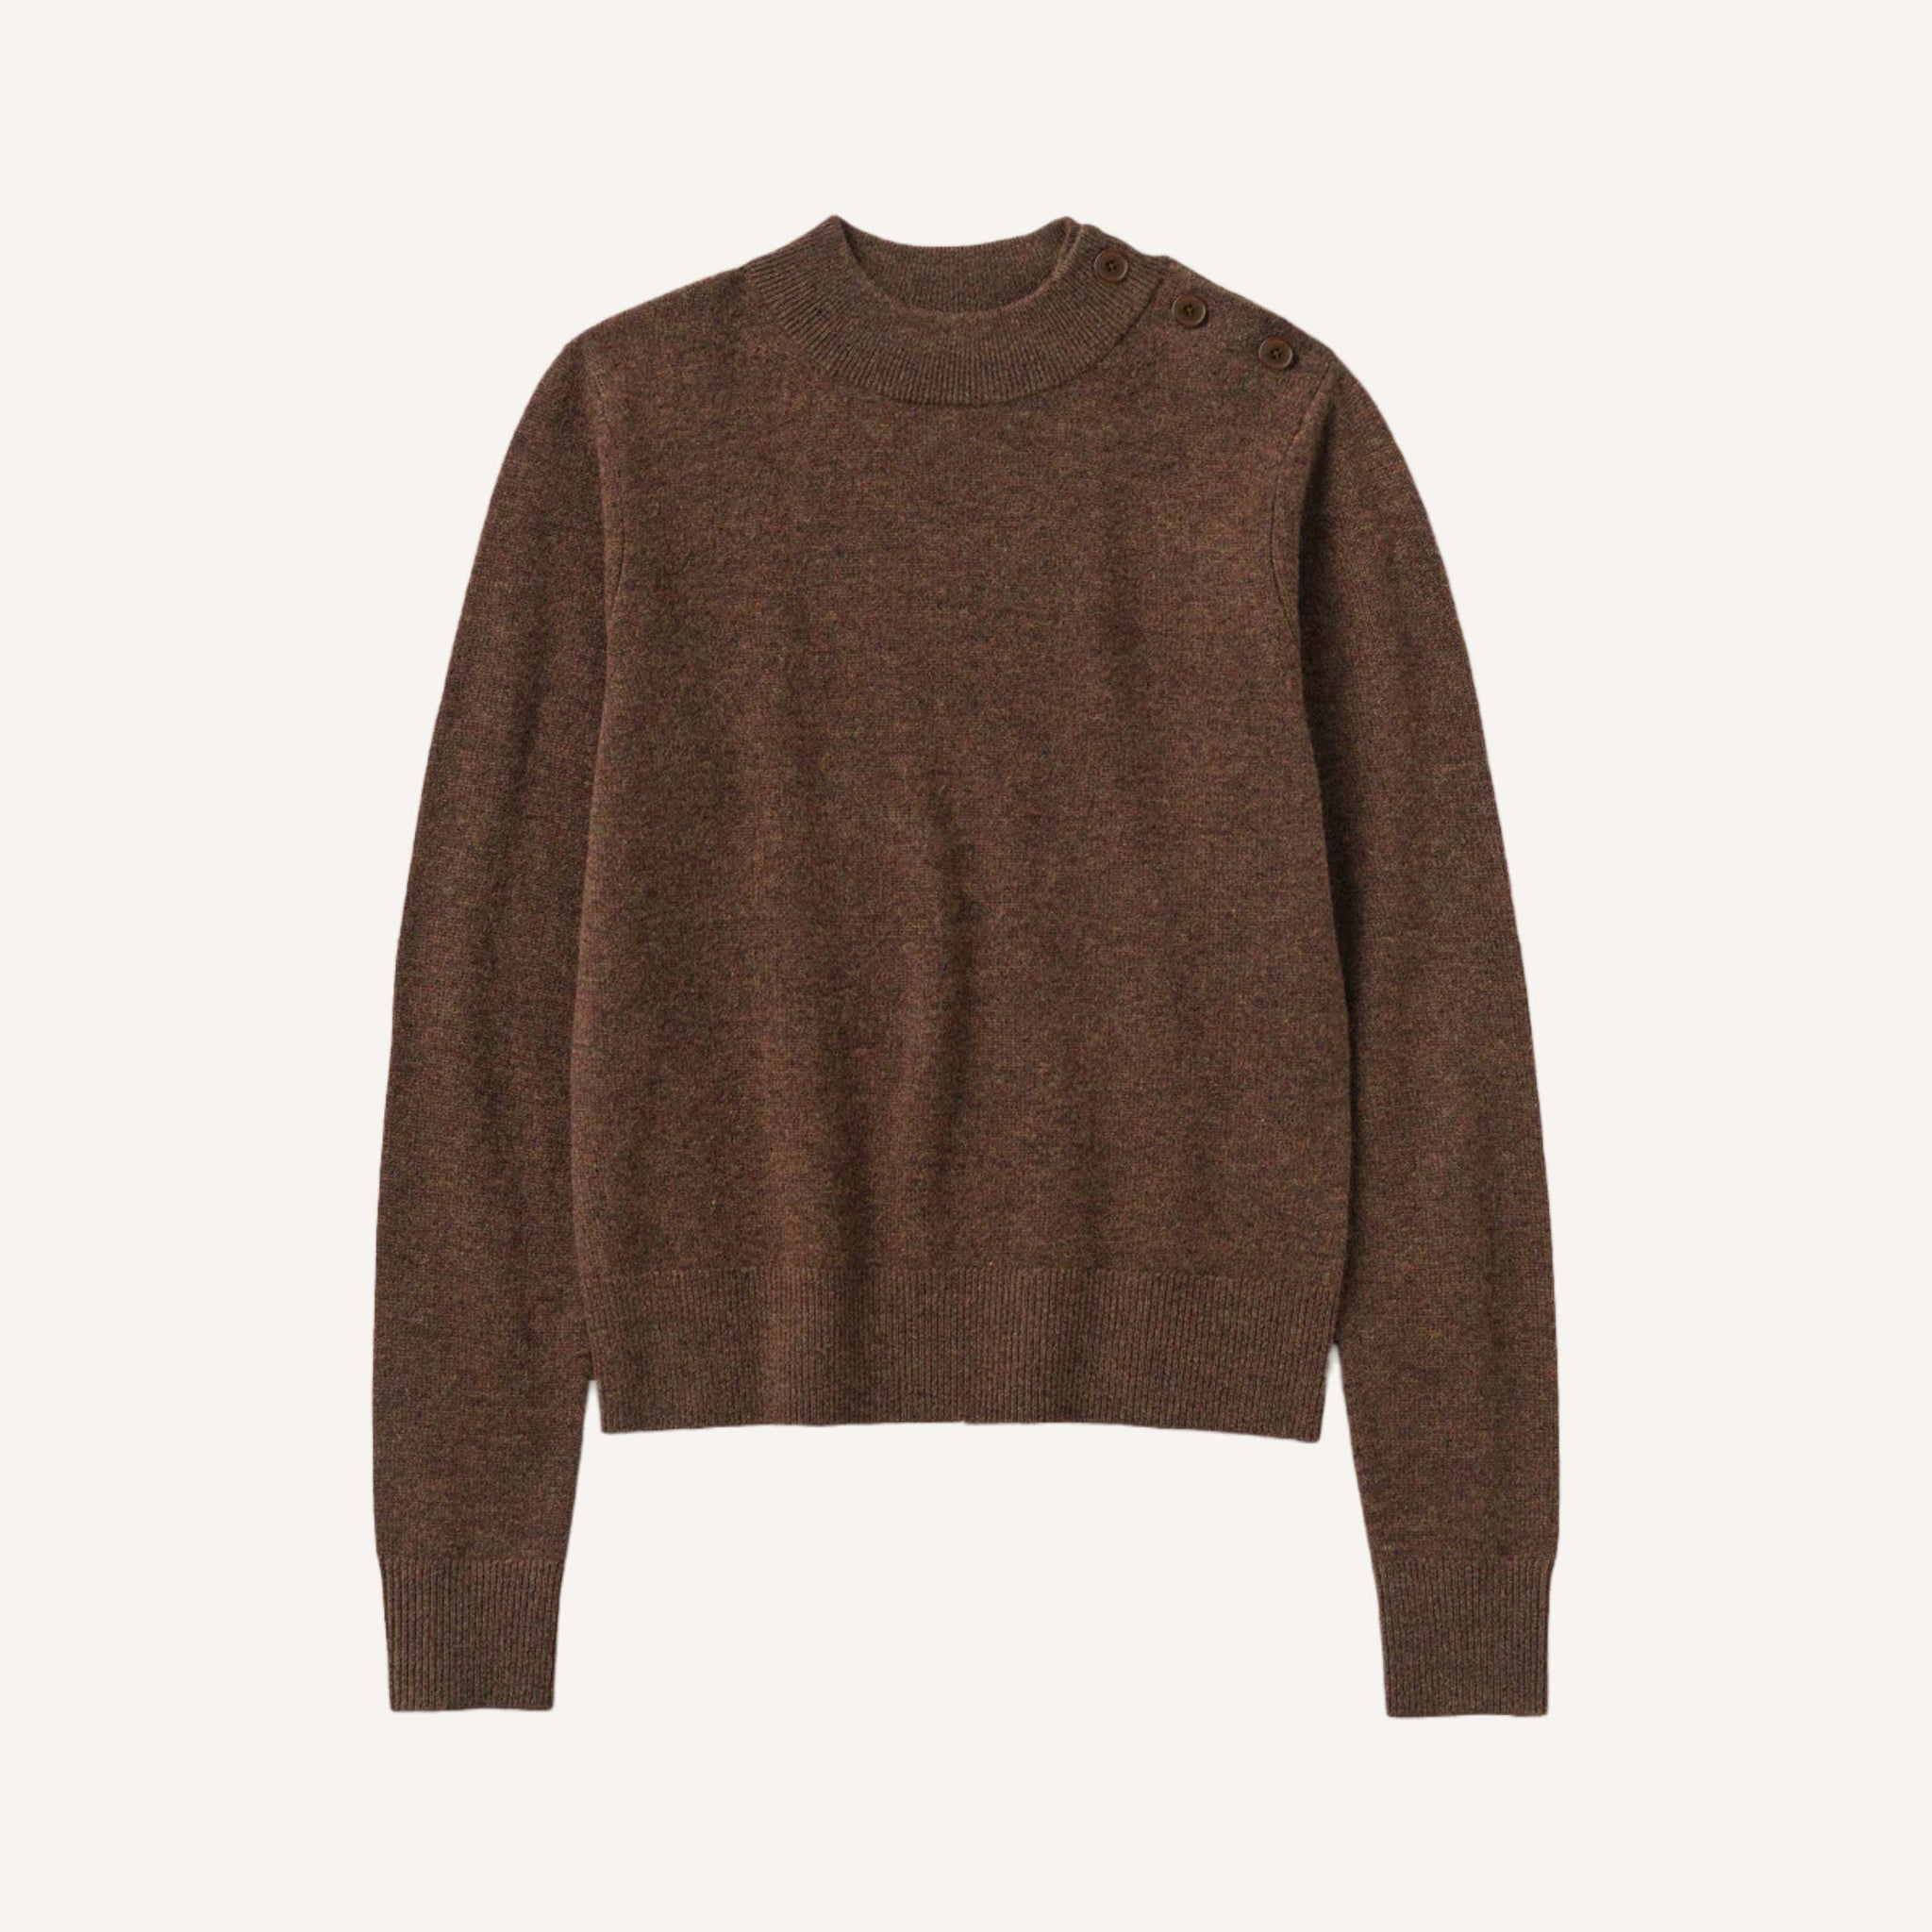 TOAST BUTTON SHOULDER SWEATER